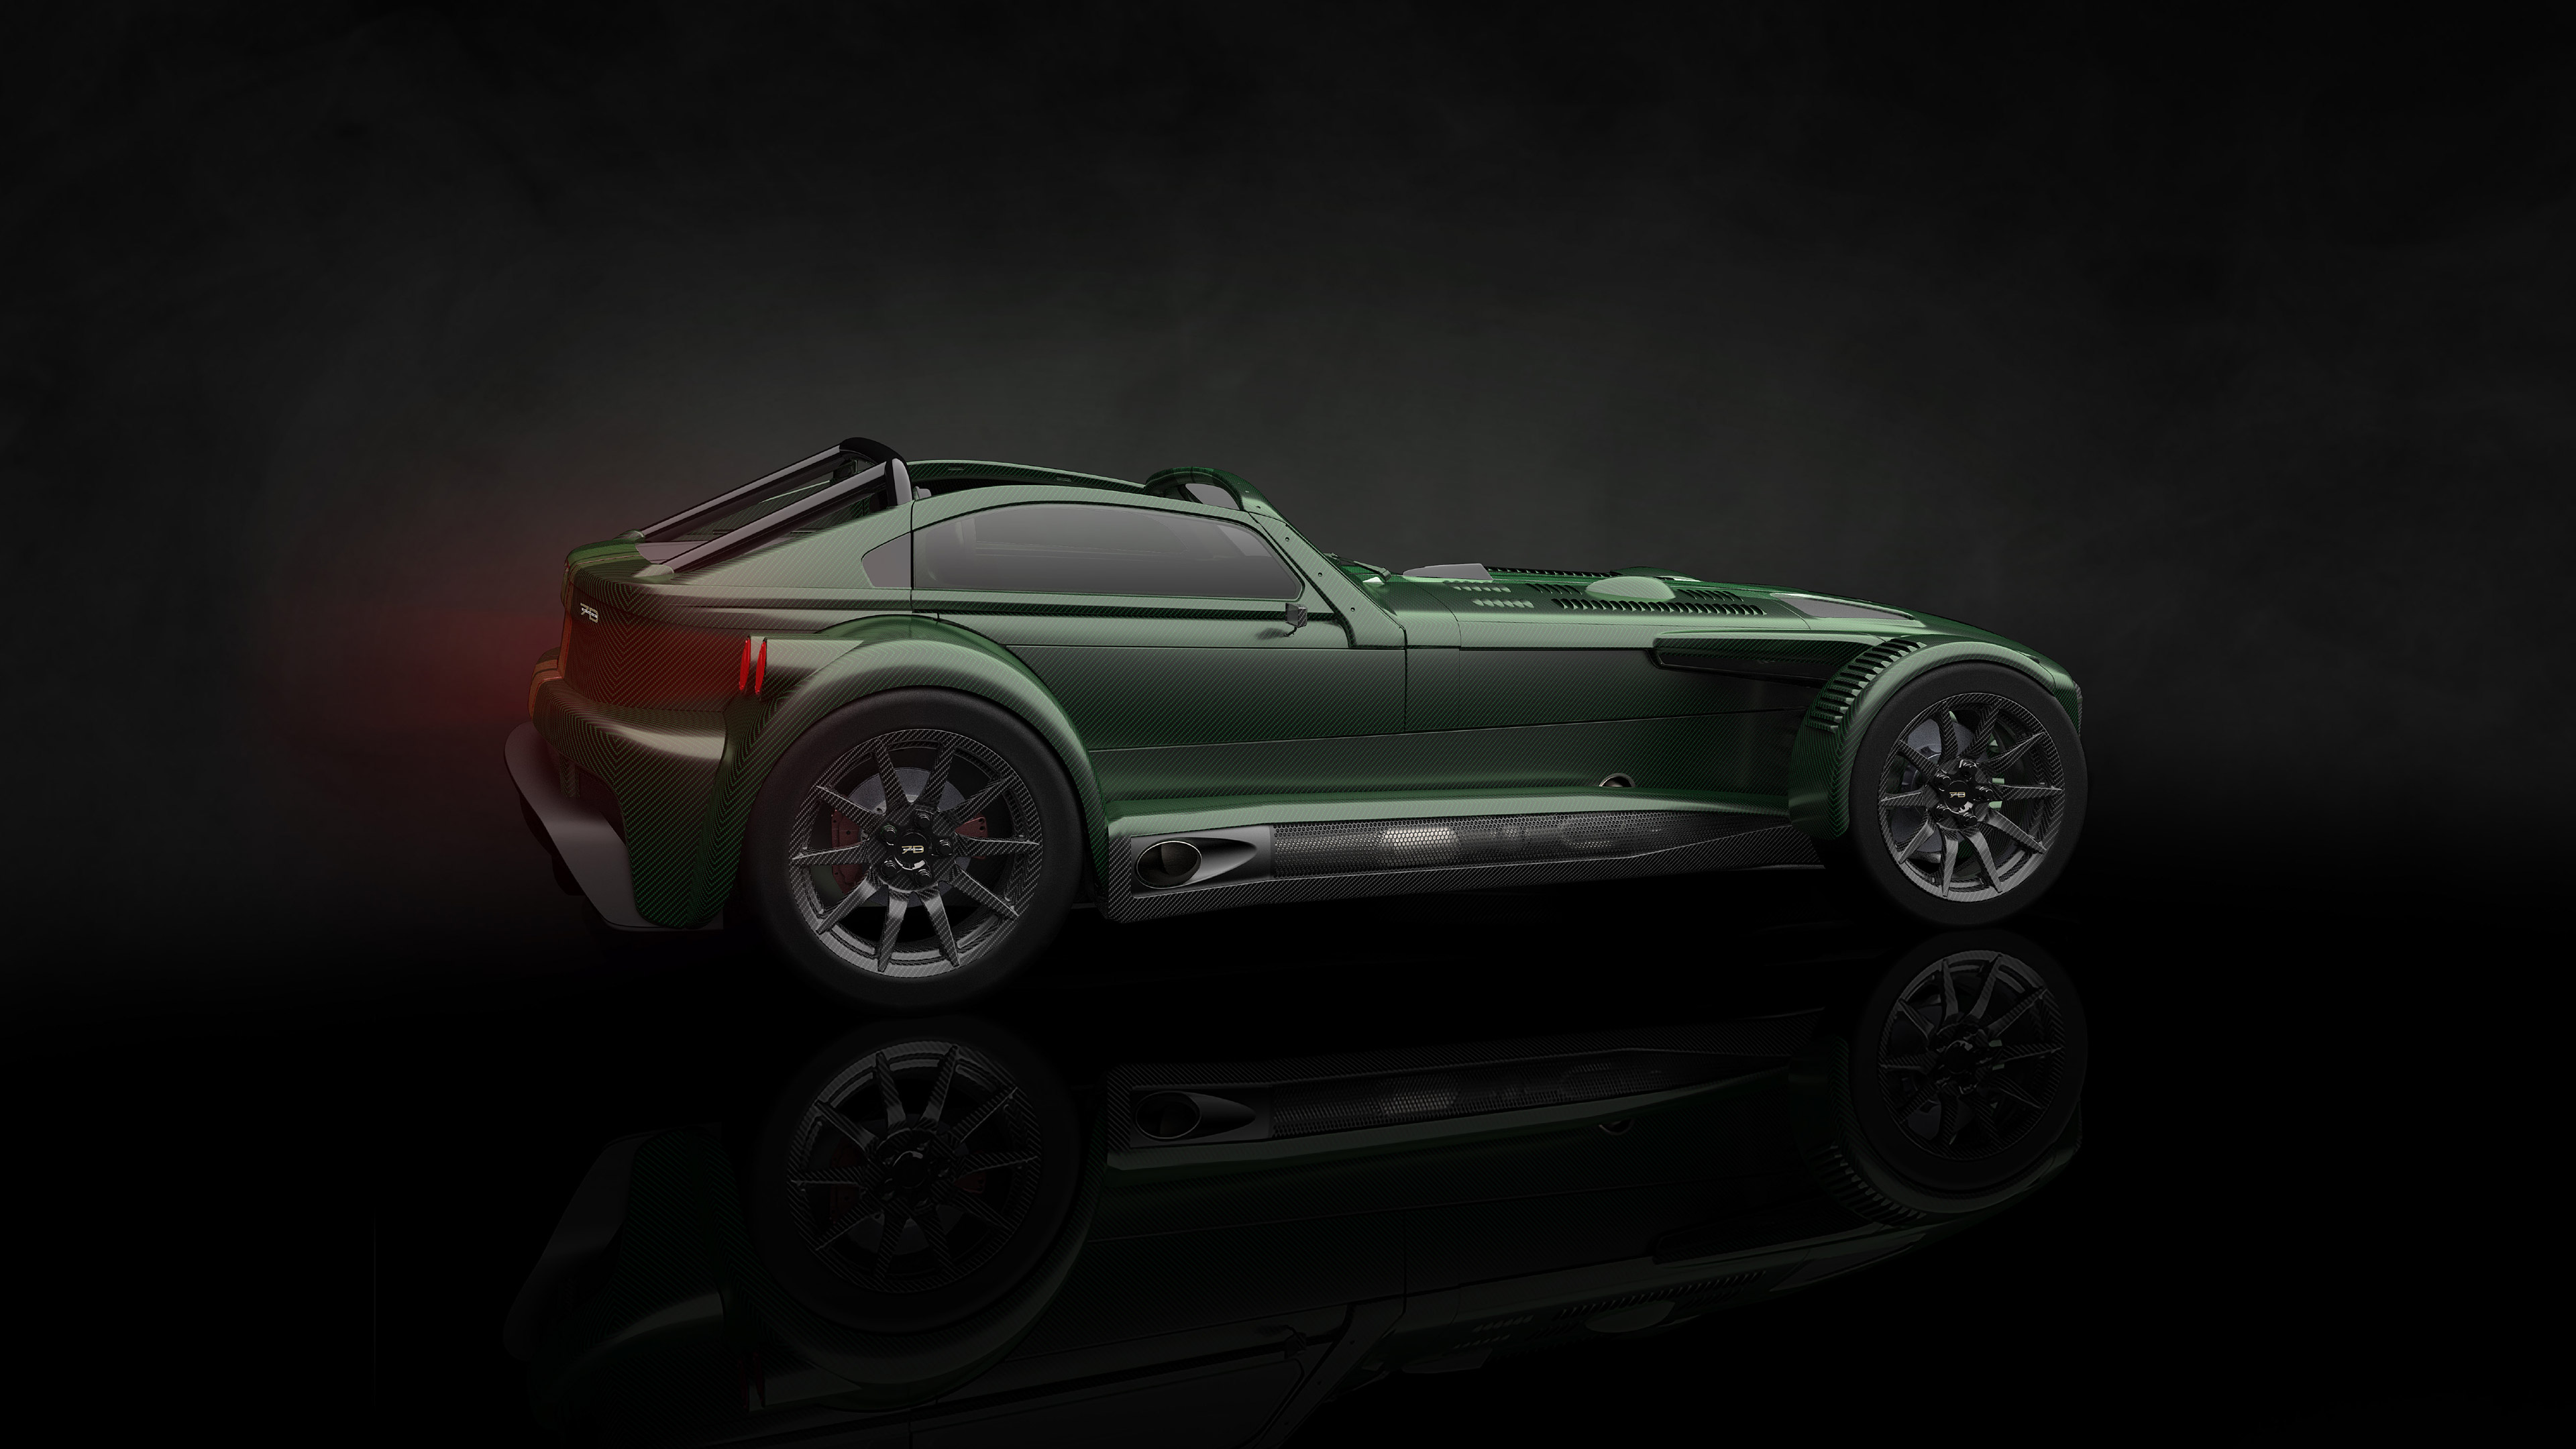 Full HD Donkervoort D8 Gto Jd70 Background